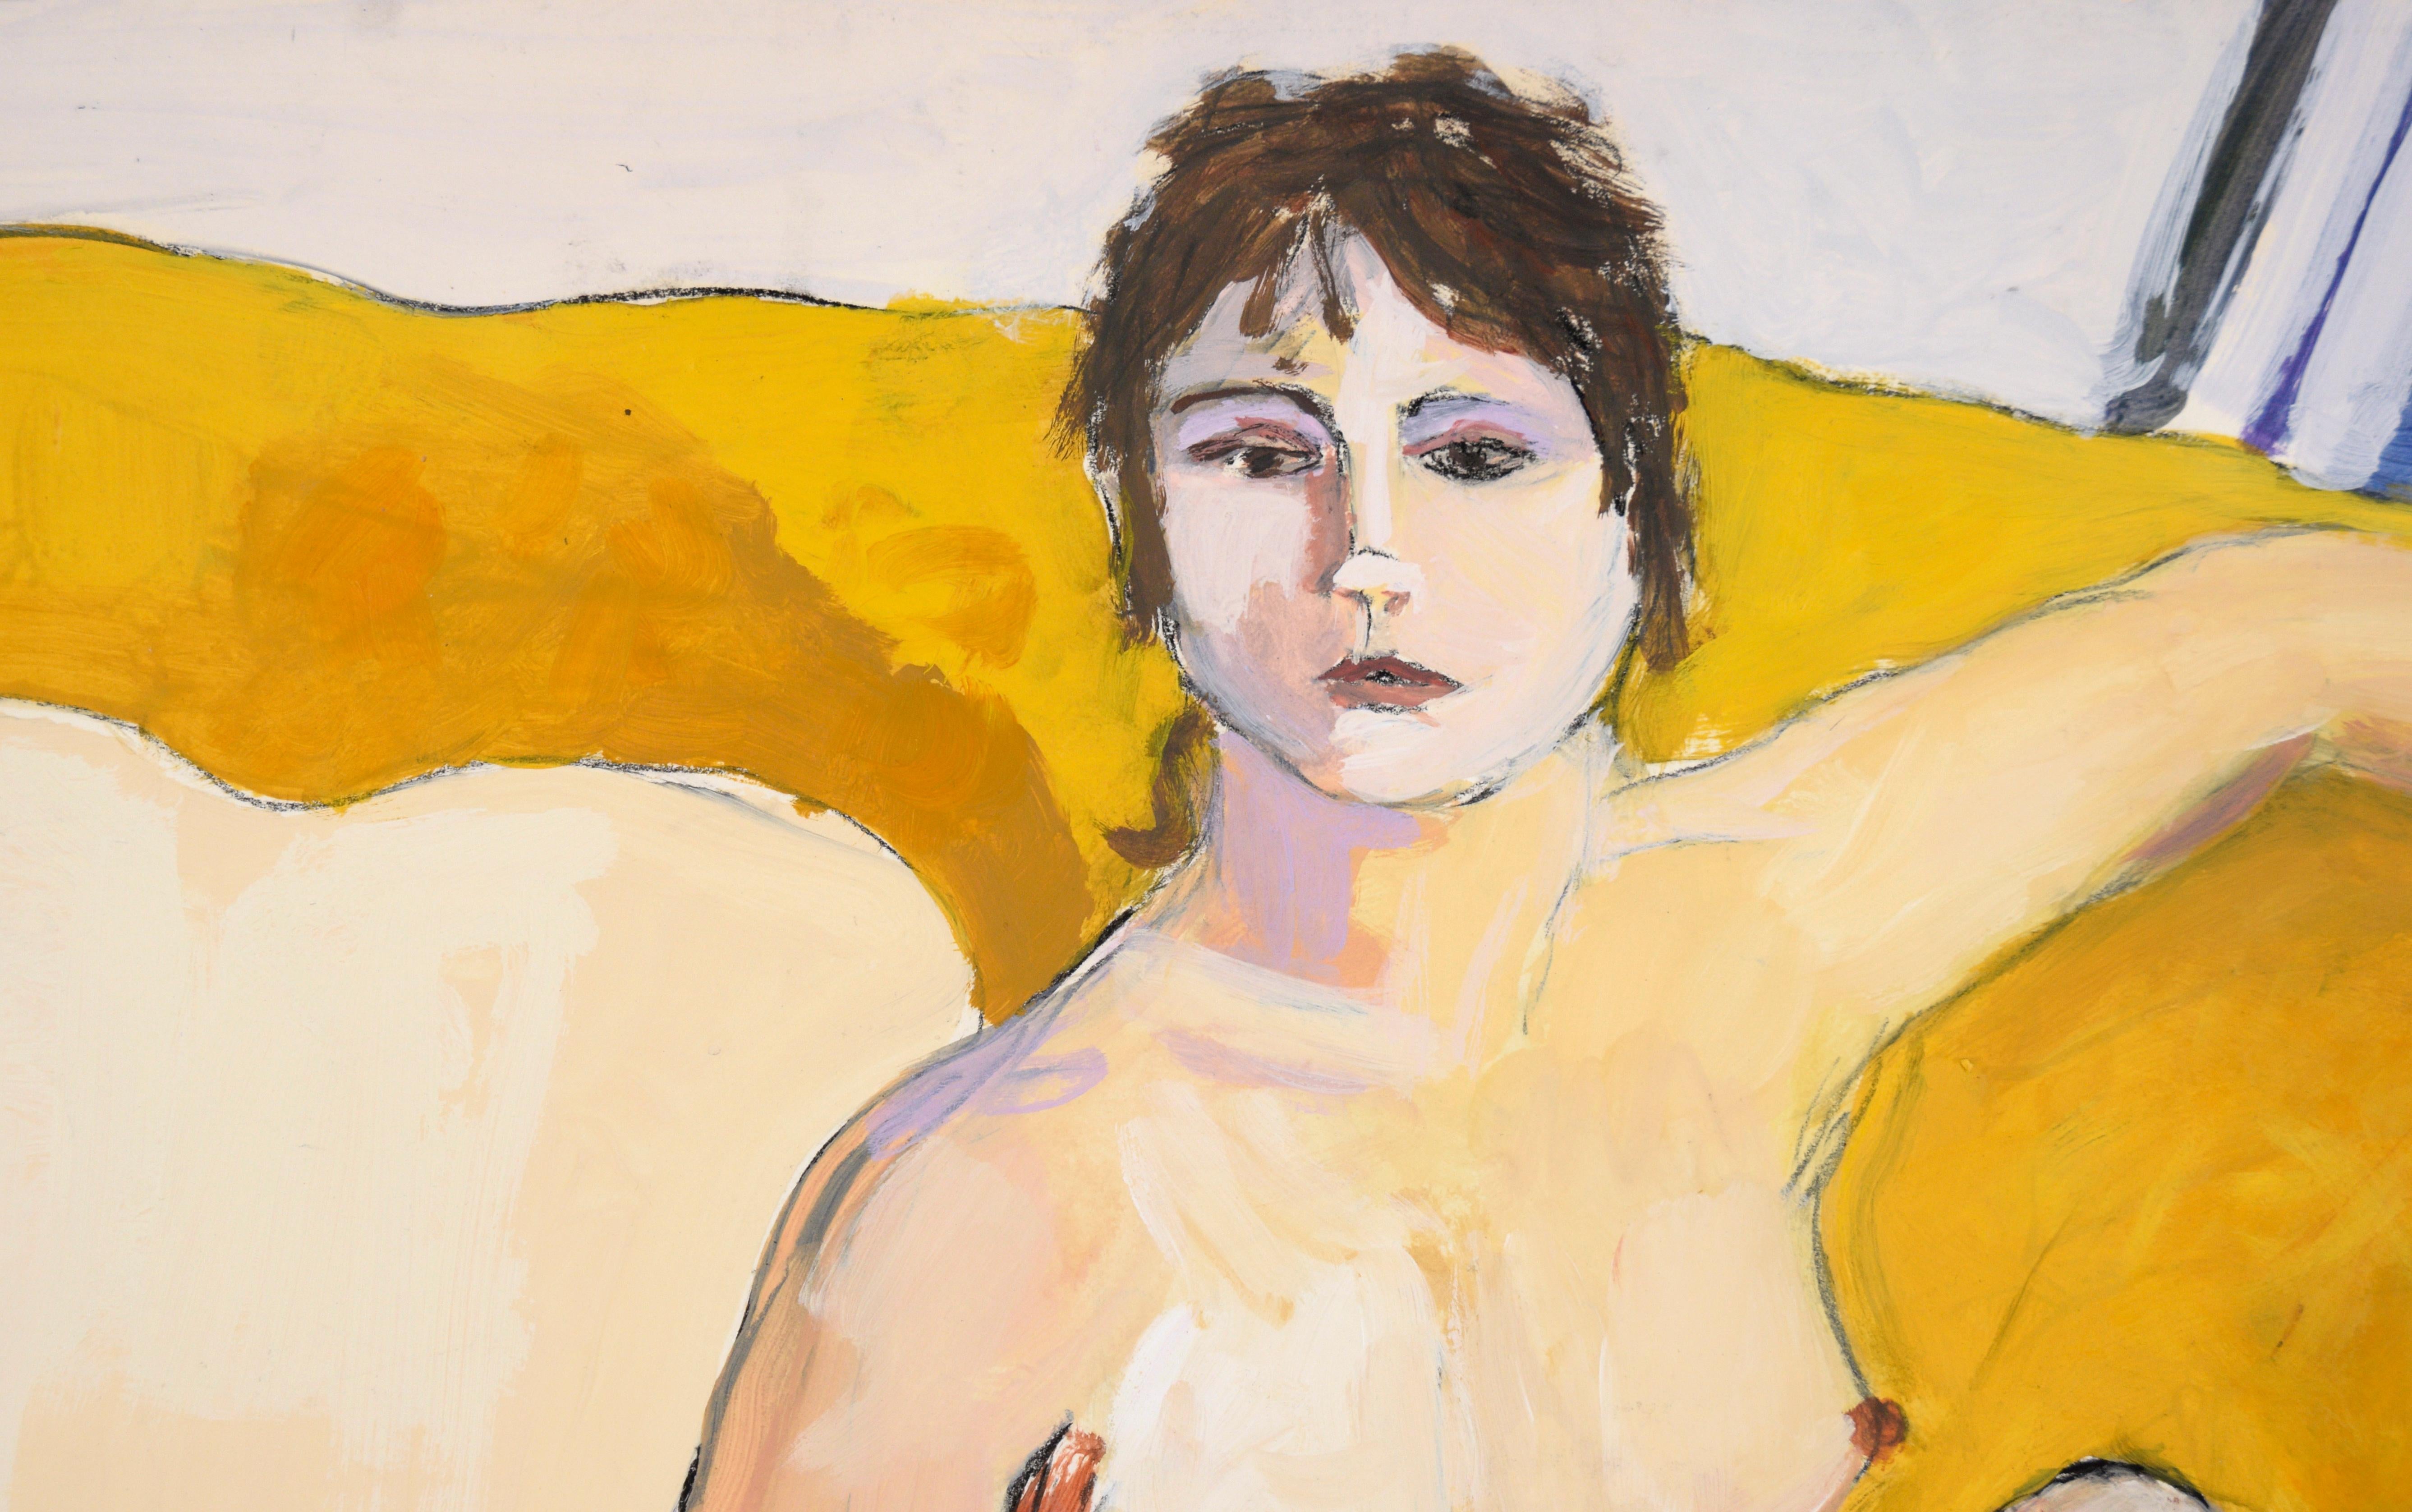 Nude Woman on Yellow Couch in Acrylic on Paper - Painting by Katherine Kallick